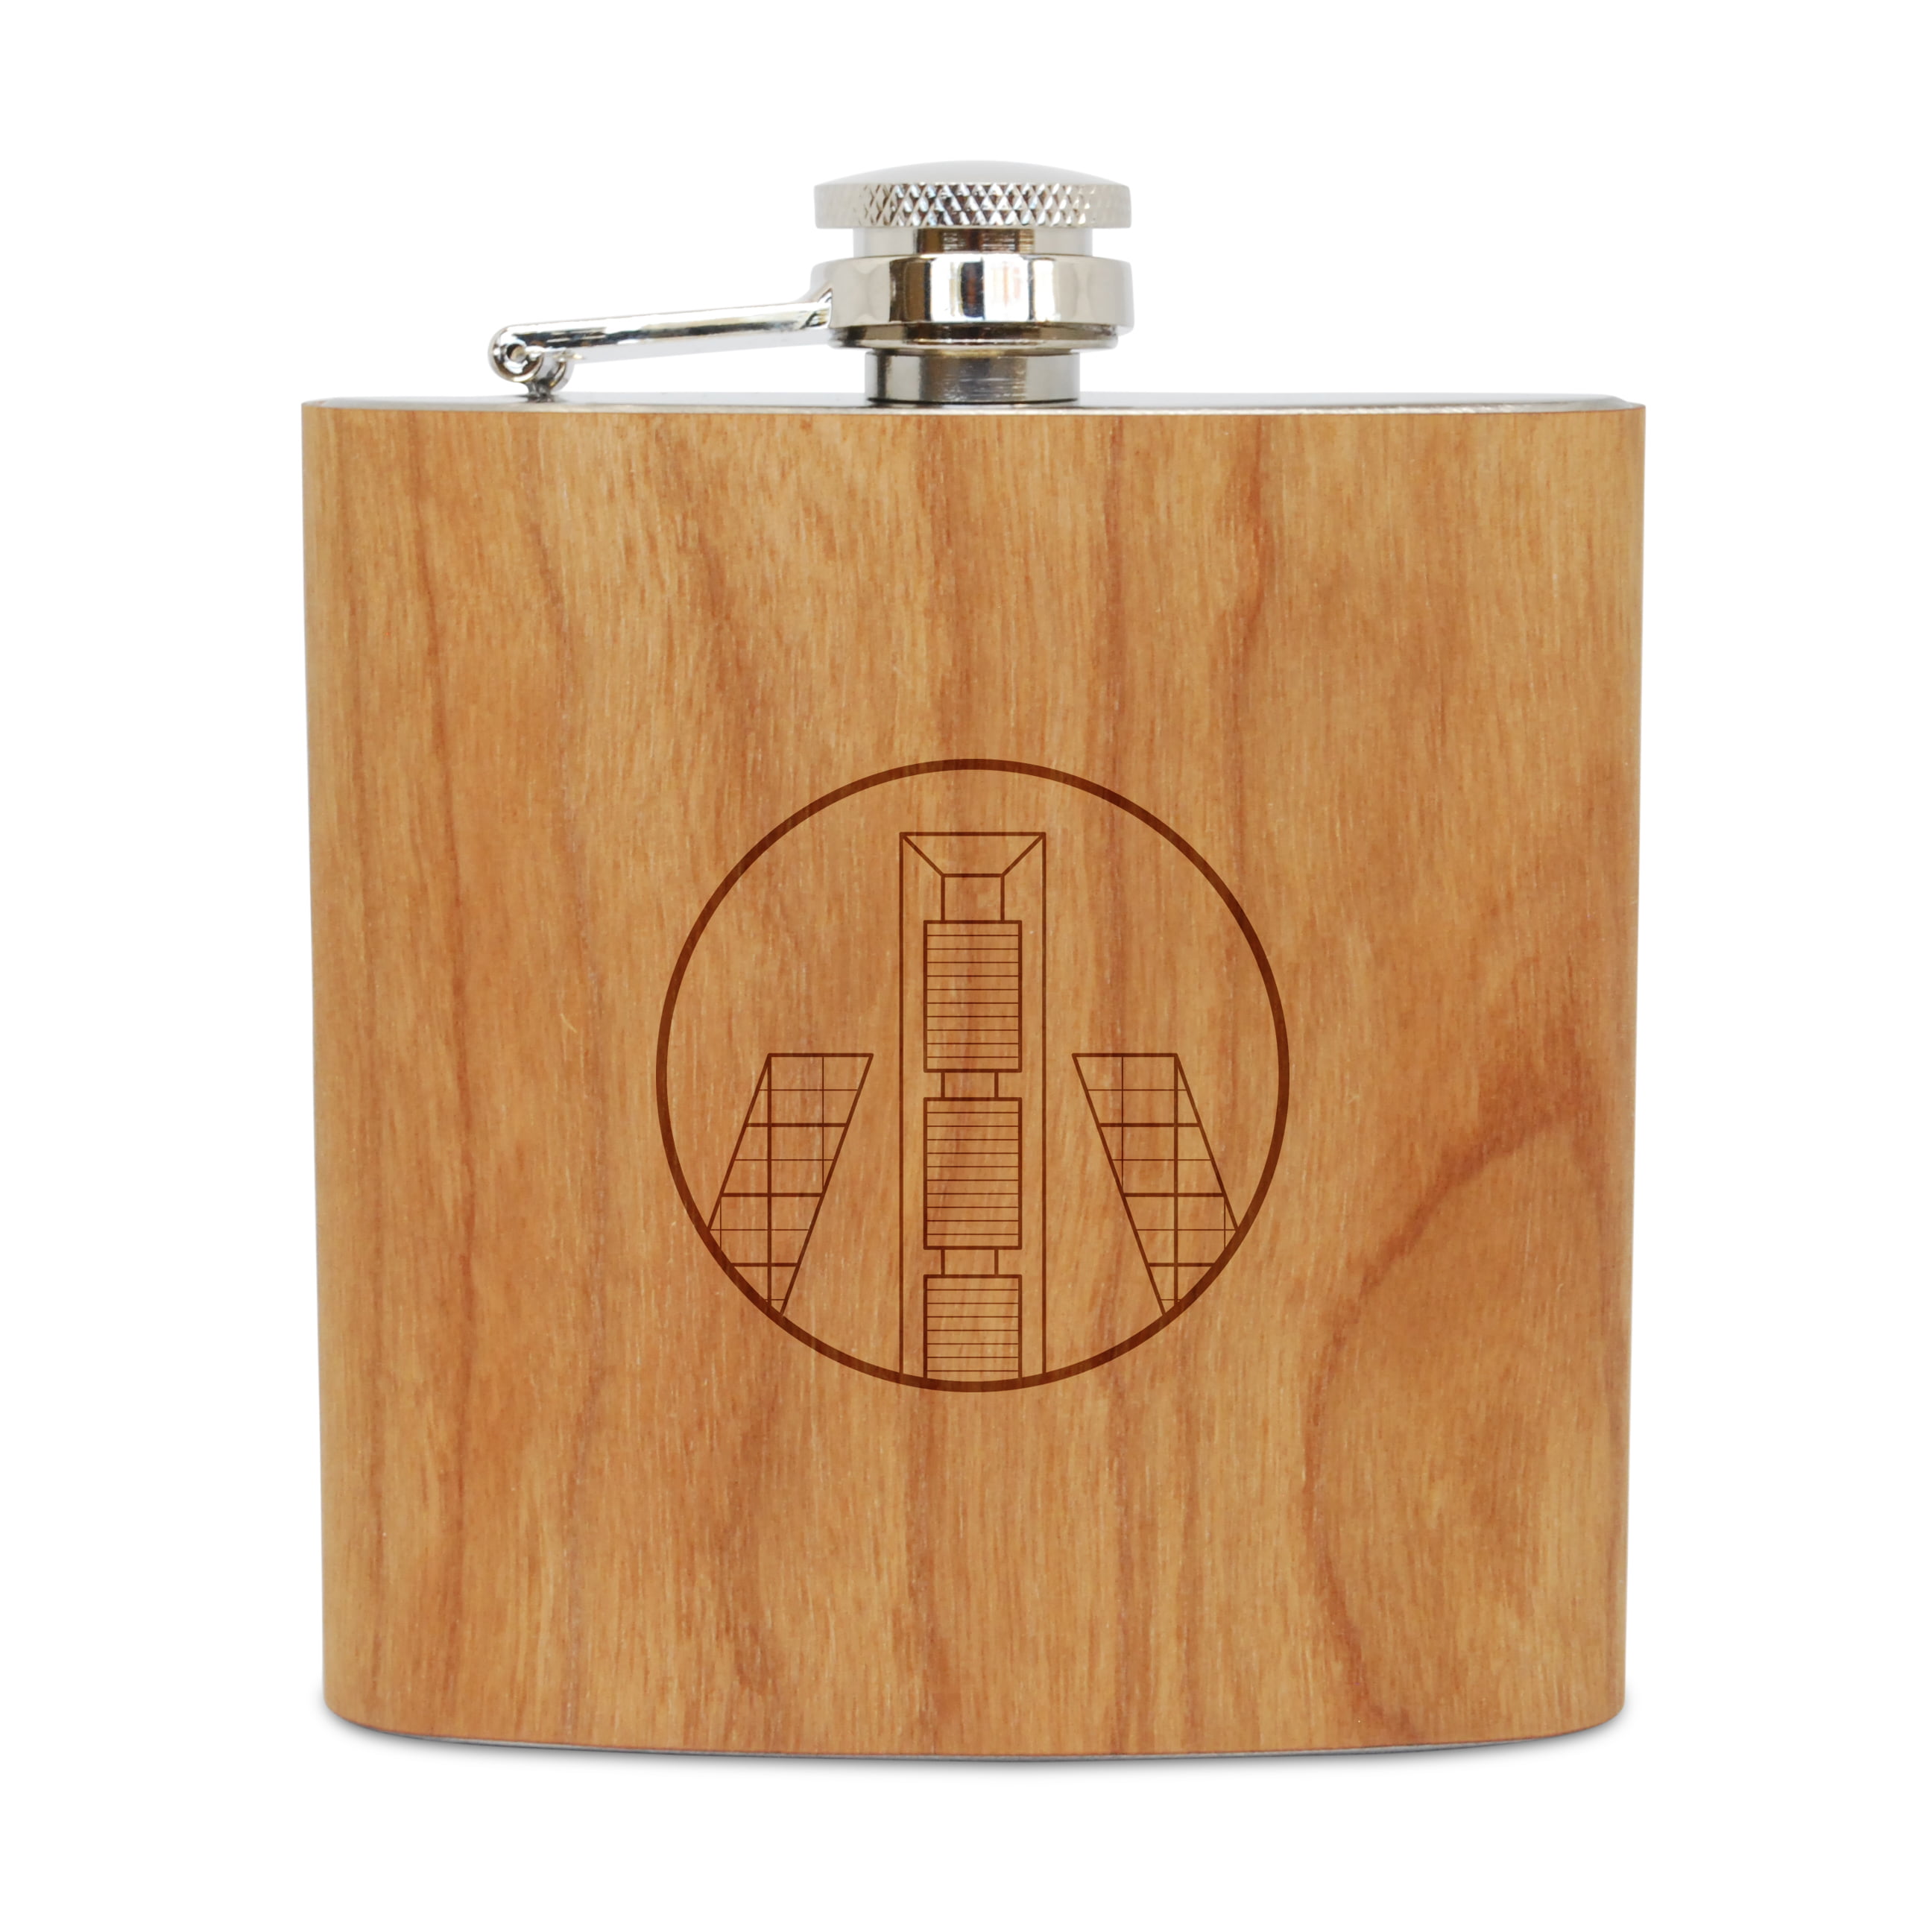 6 Oz Wood Hip Flask Handmade In USA Laser Engraved Flask With Whiskey Design WOODEN ACCESSORIES COMPANY Cherry Wood Flask With Stainless Steel Body 